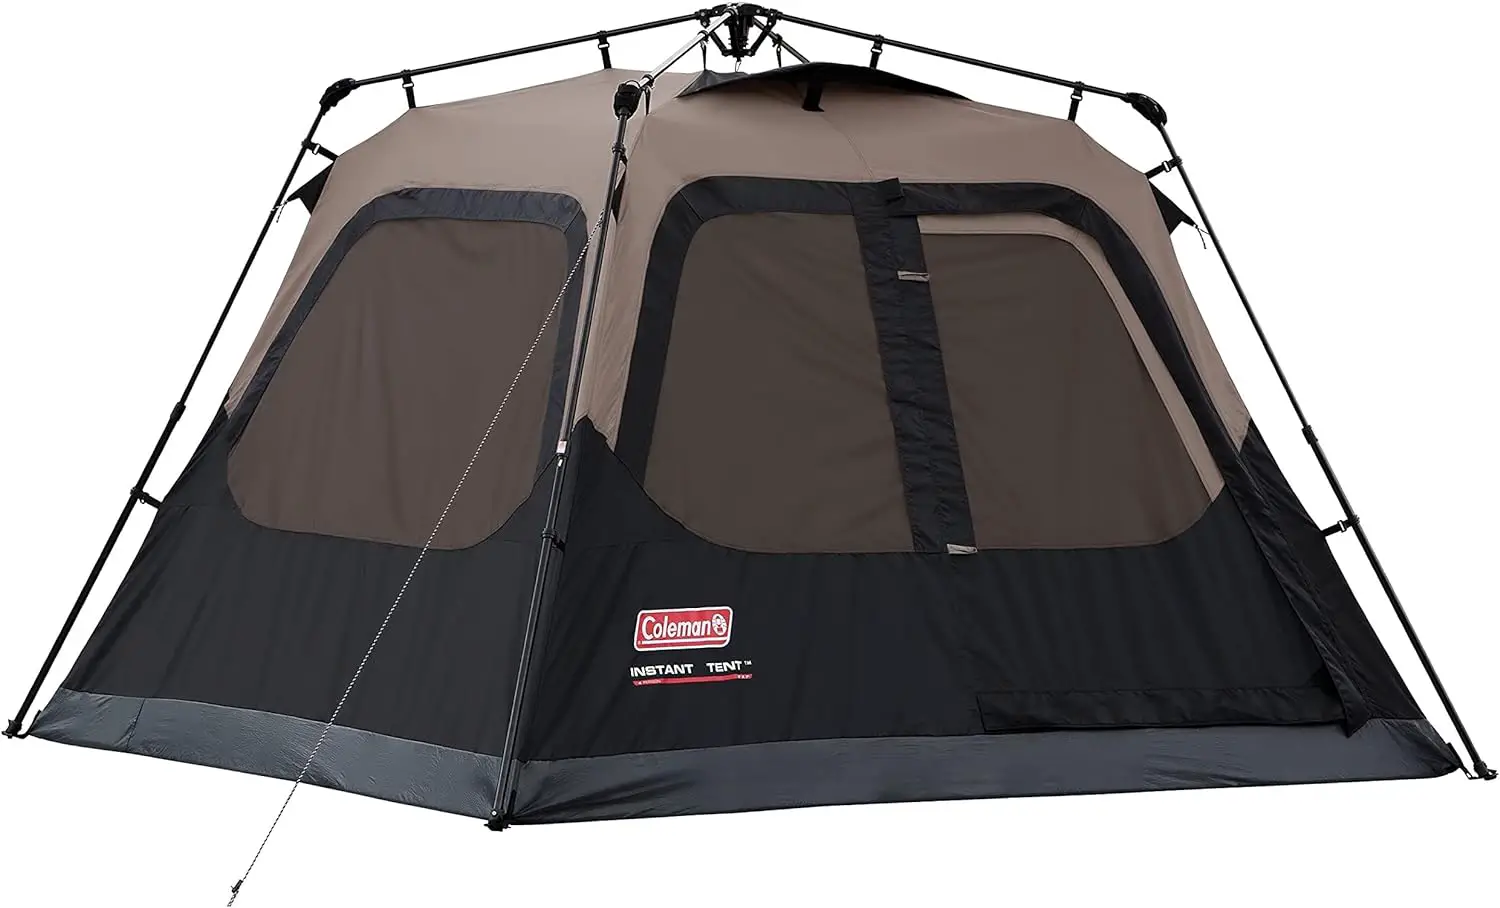 Coleman Camping Tent Review